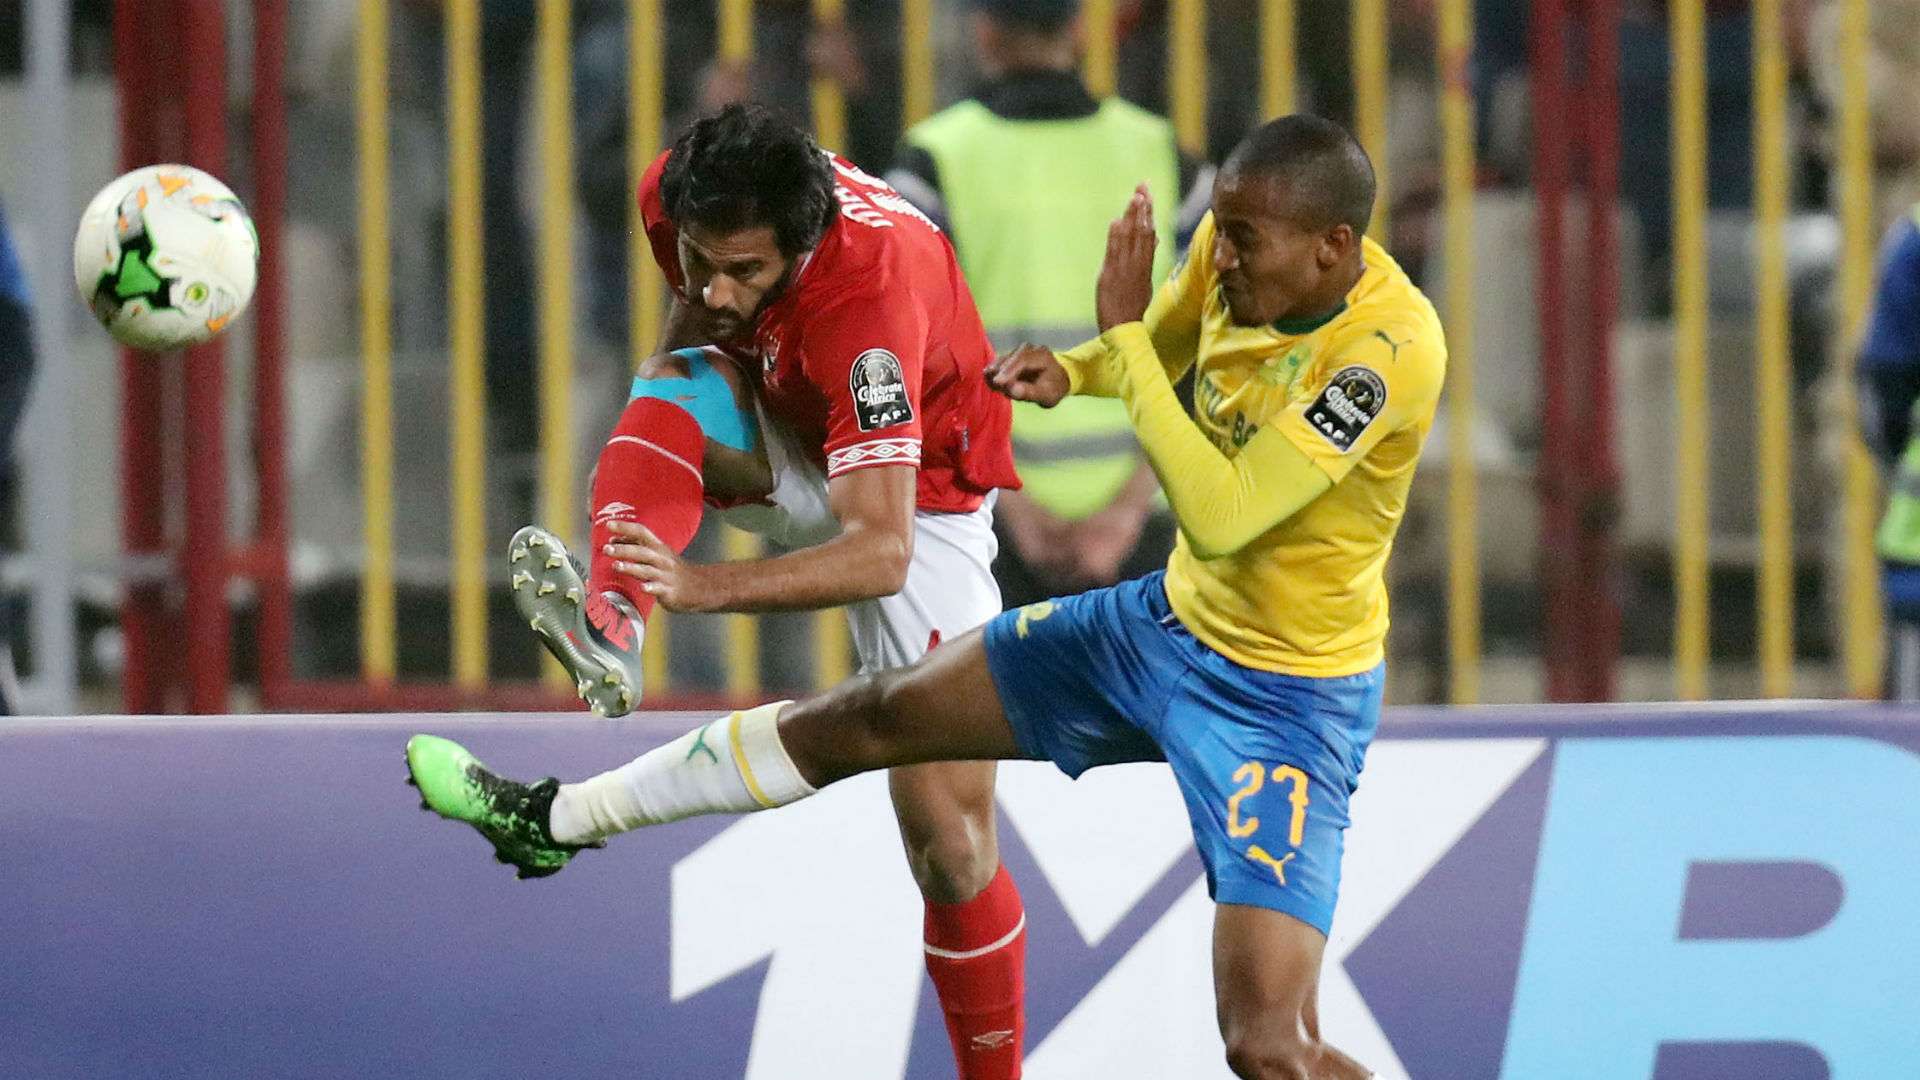 Mohsen Marwan of Al Ahly challenged by Thapelo Morena of Sundowns, April 2019